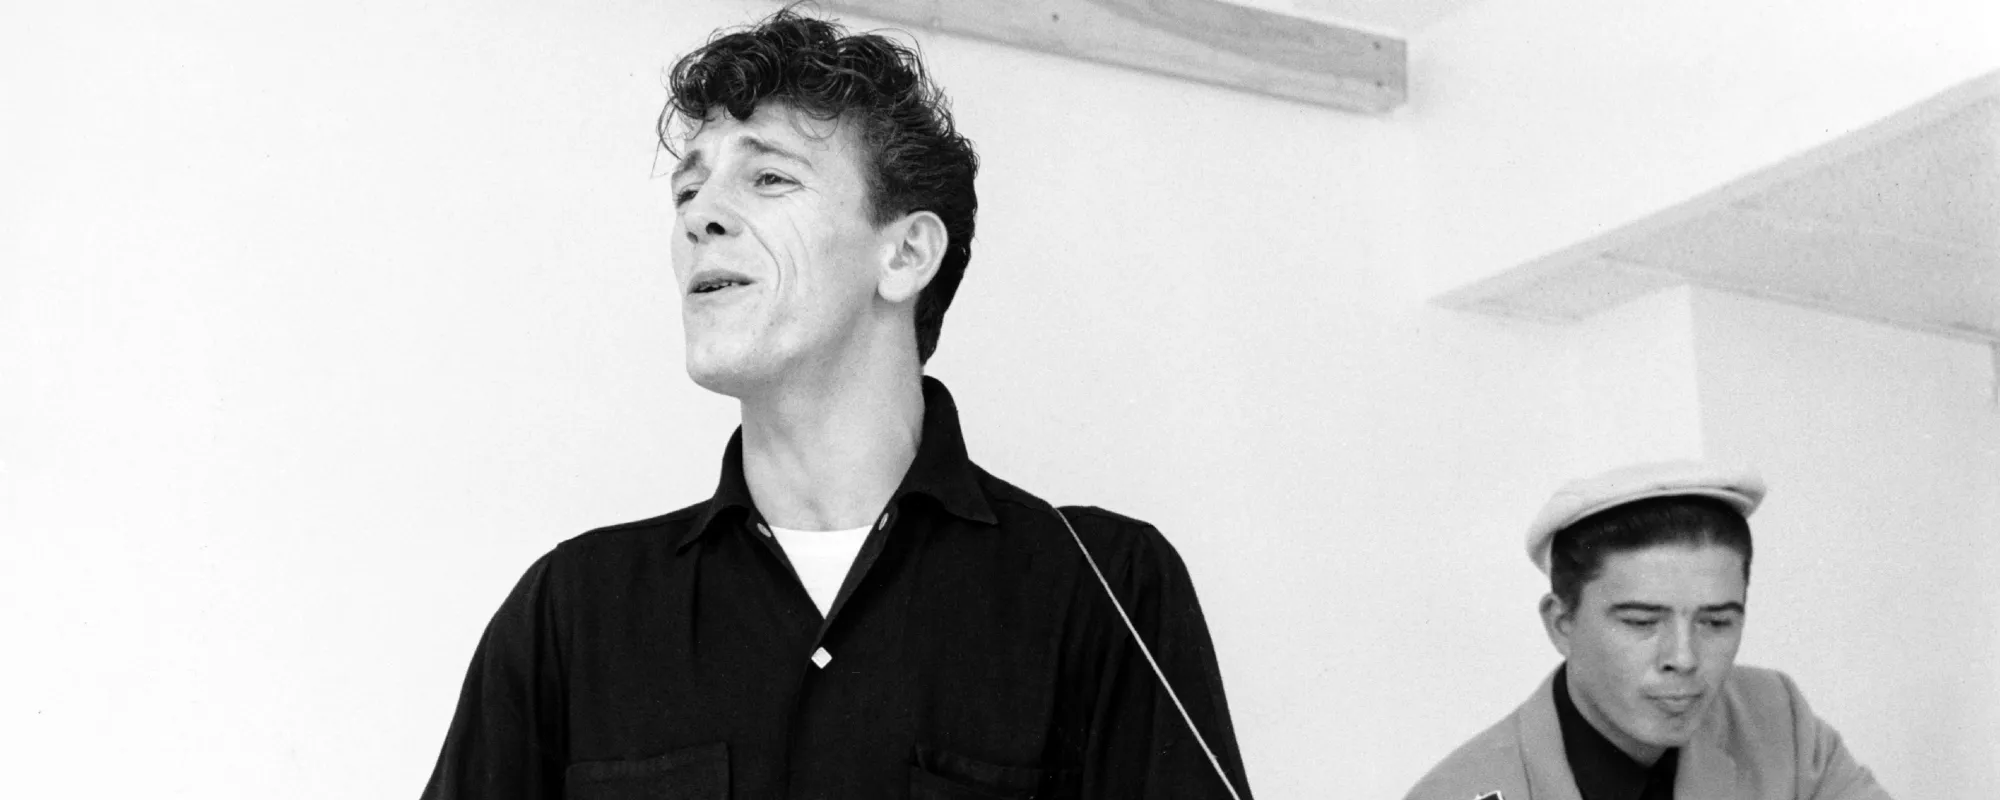 The Meaning of “Be-Bop-A-Lula” by Gene Vincent and Why It’s Still a Mystery Who Wrote It